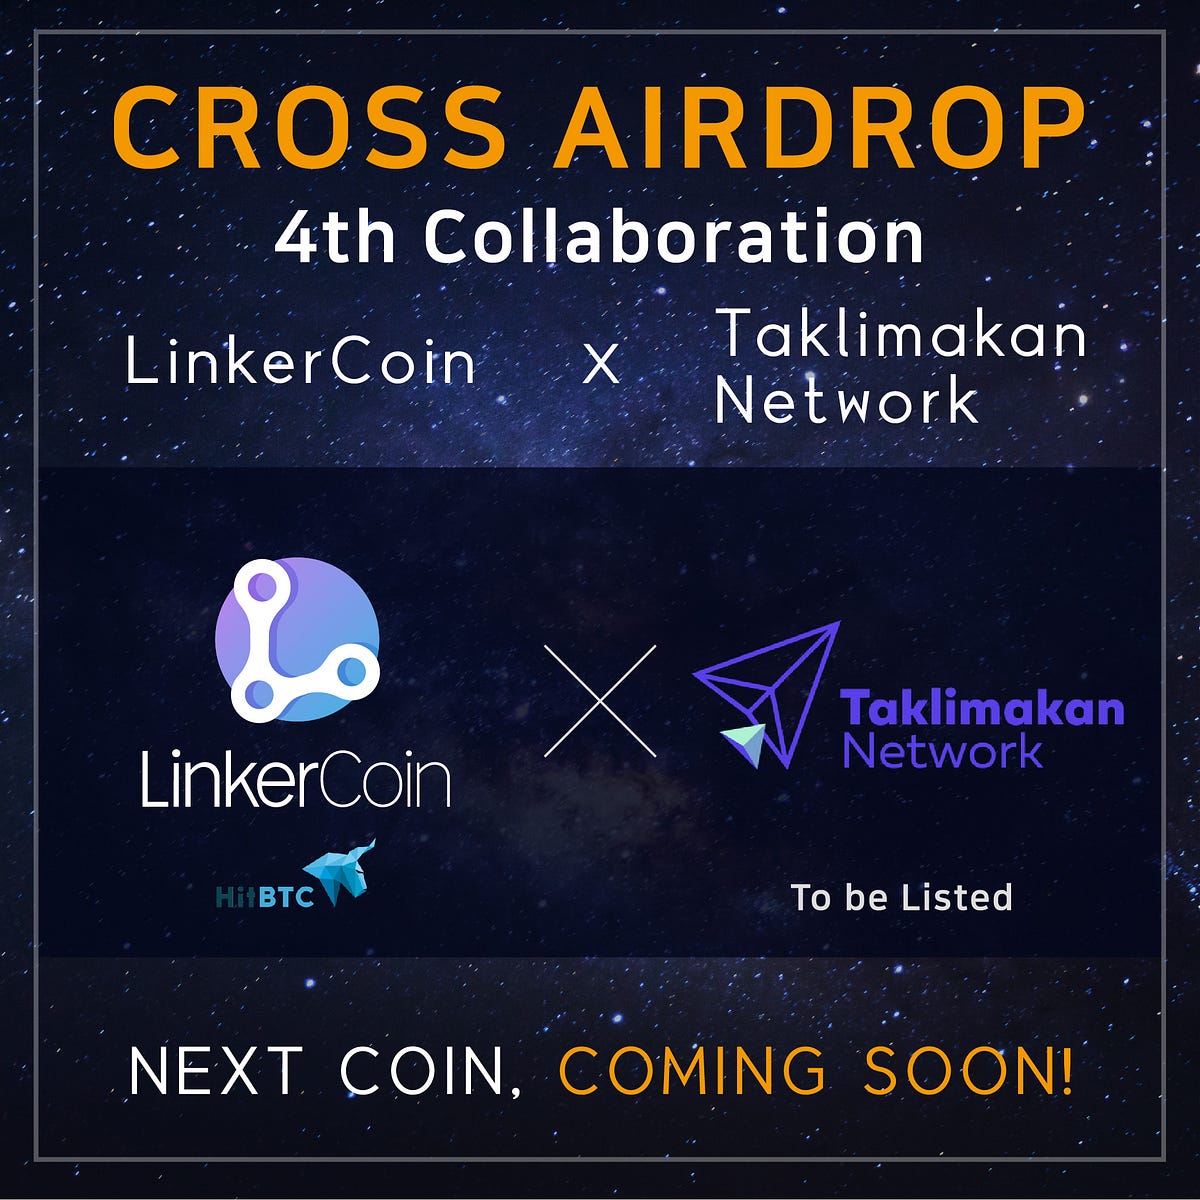 [ANNOUNCEMENT] Linker Coin 4th Cross Airdrop Collaboration